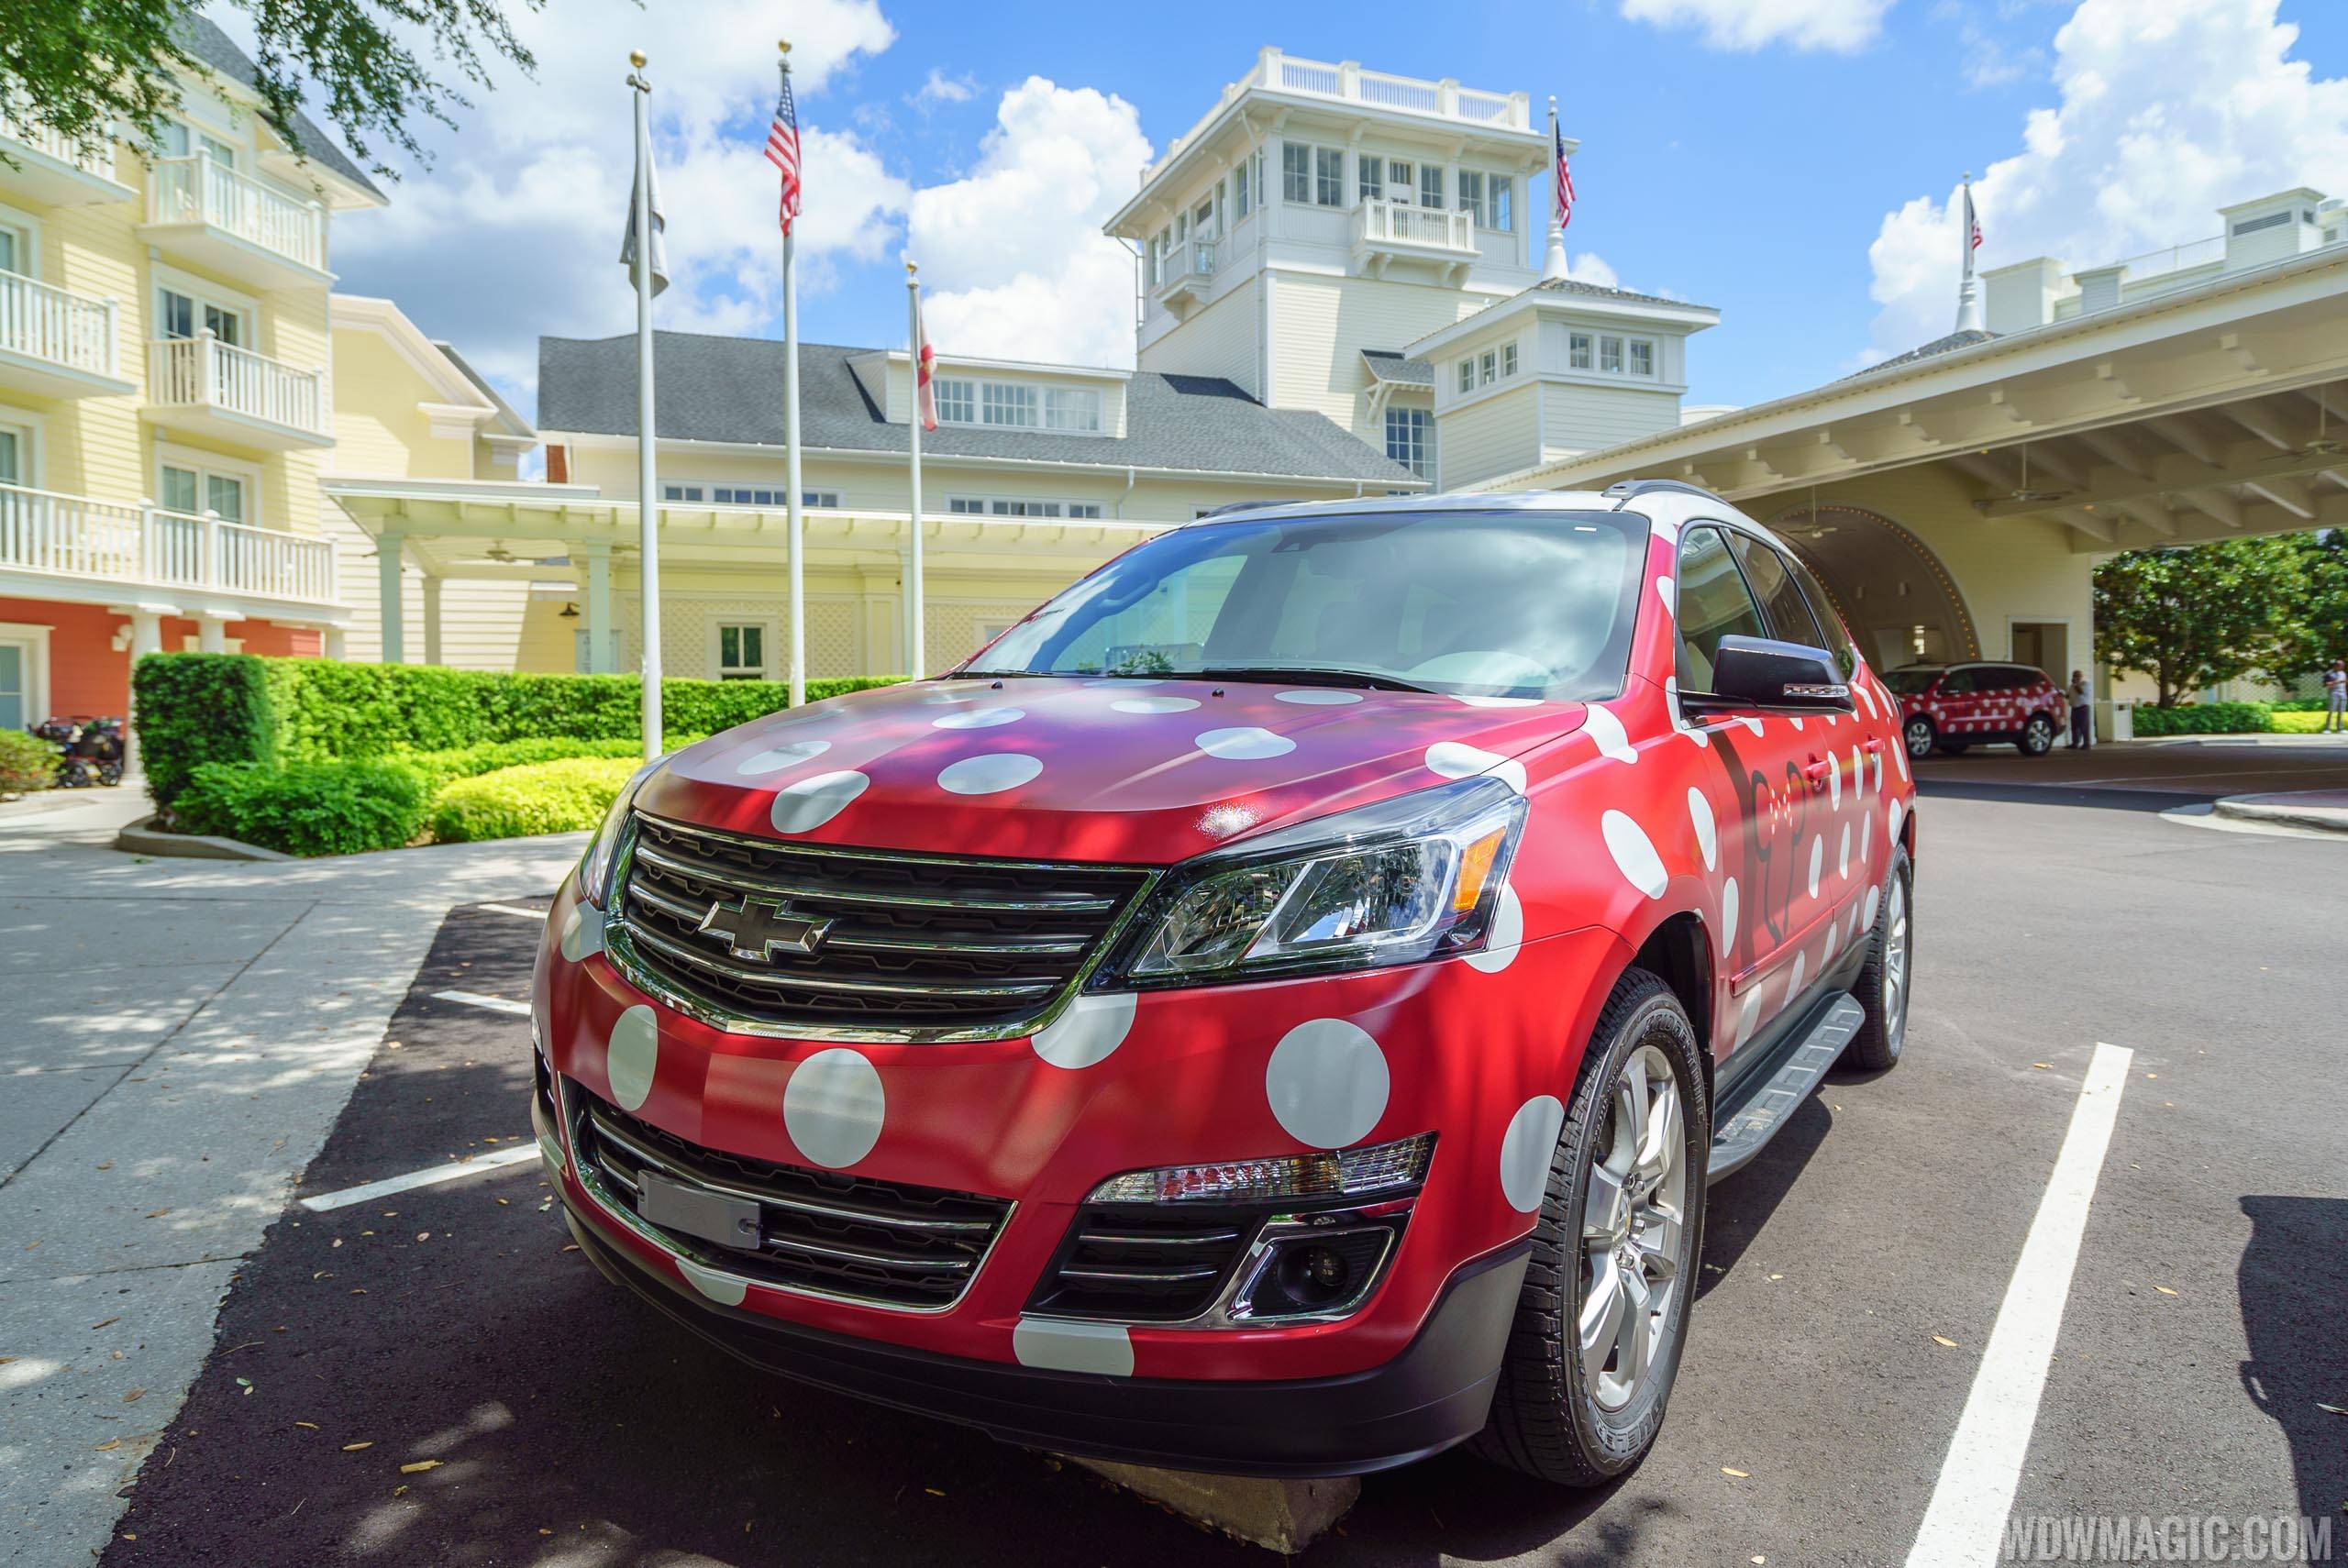 Minnie Van Service to move to distance based pricing and expanding to non-Disney hotels